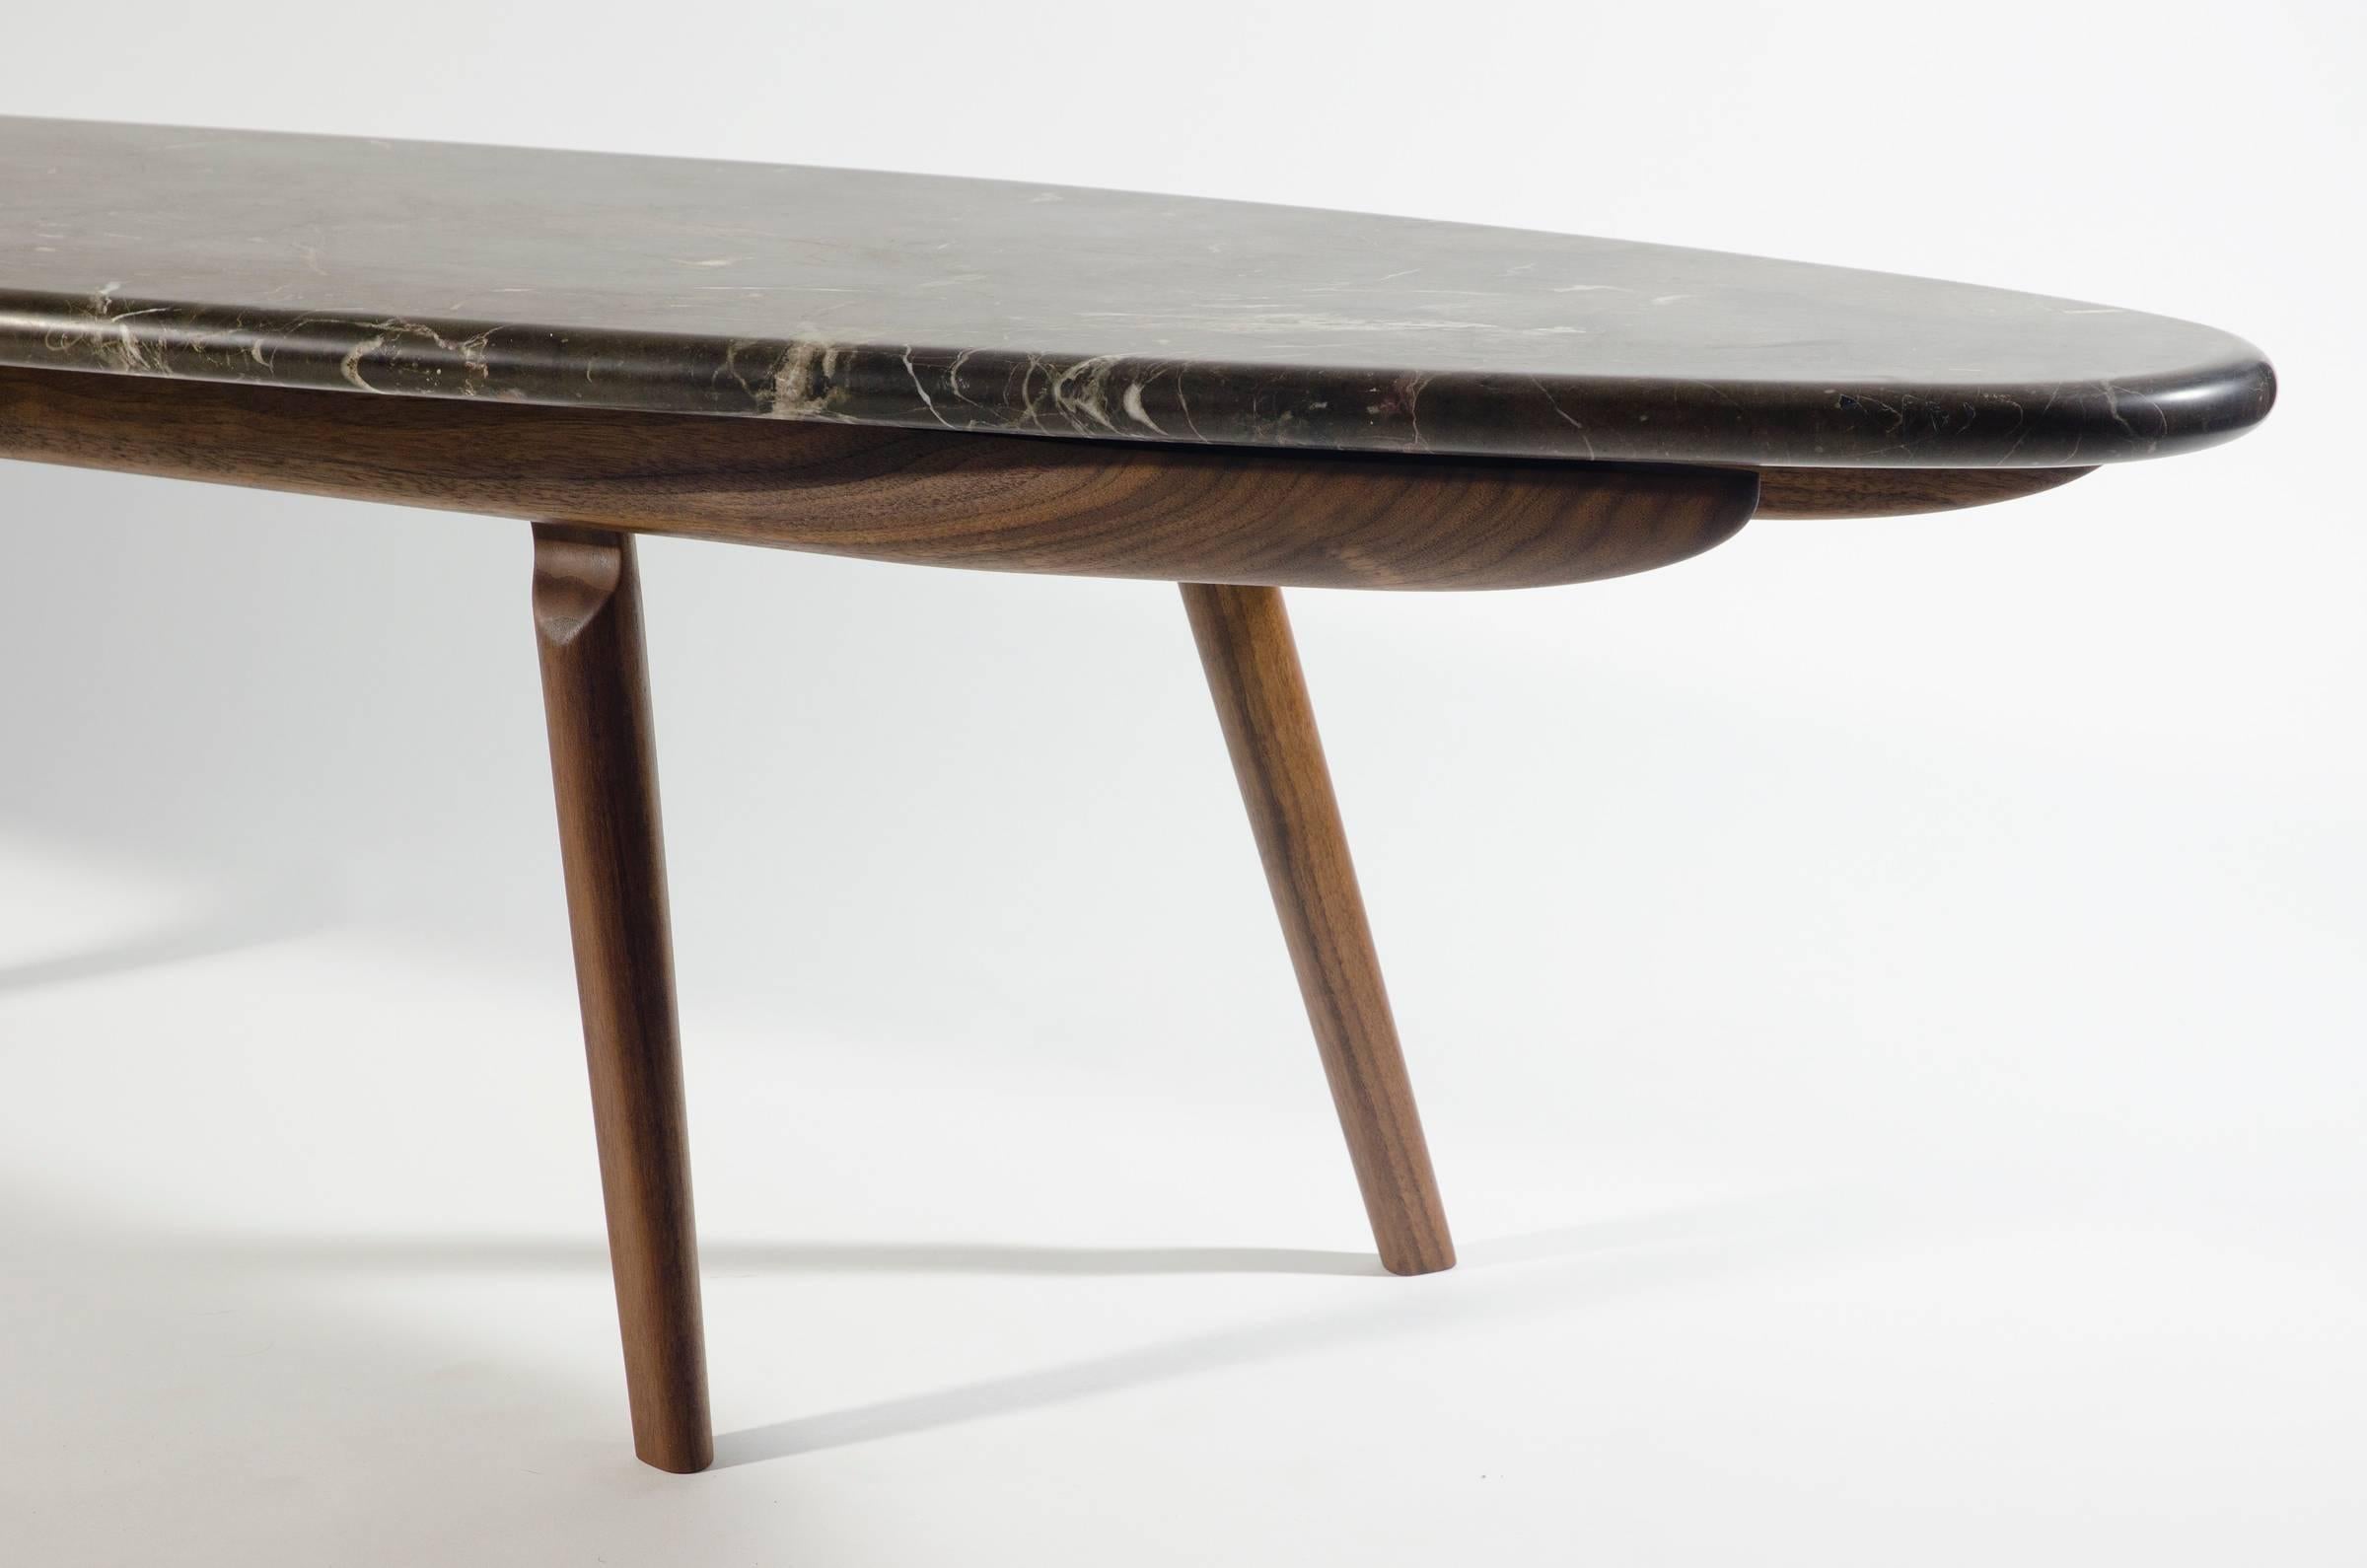 In a similar spirit to the skip table, the Wendel table's form is inspired by hydrodynamics. Like a large stone in a moving body of water, the Wendel Table holds its place in any setting. The honed black marble and oiled walnut give a strong